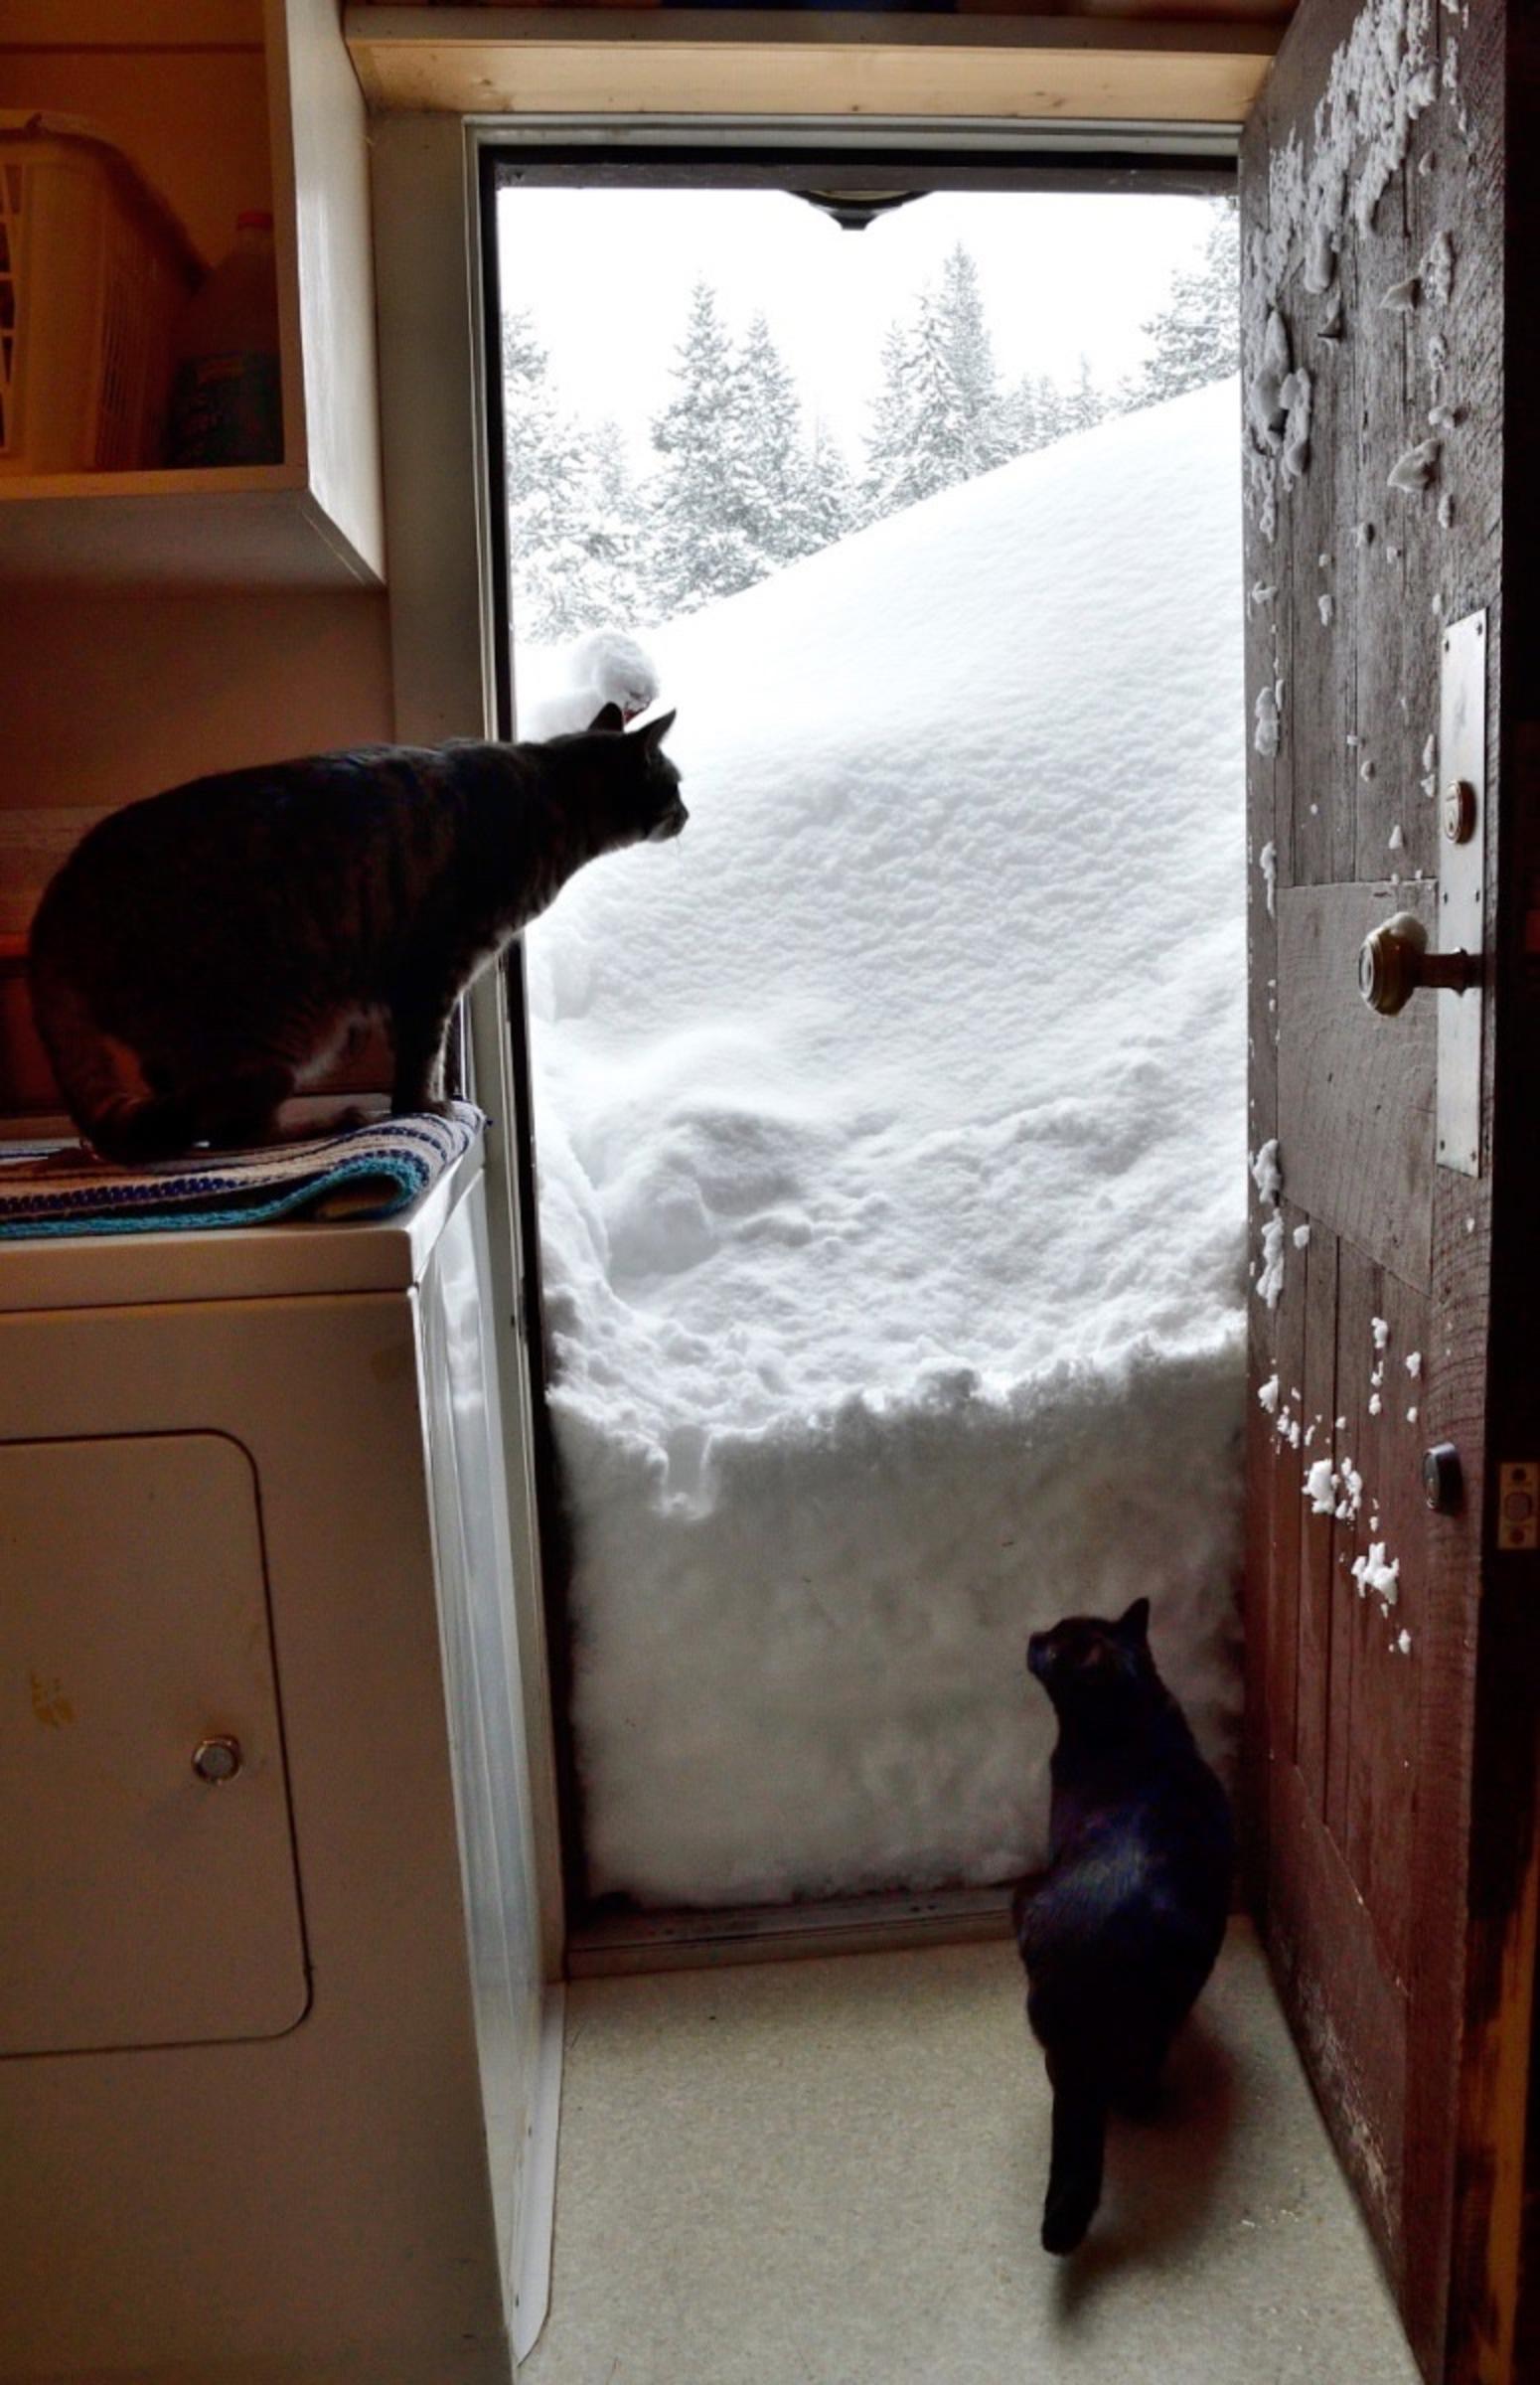 The drift at the back door, my winter entrance, the next morning. There was much more to come. Tiger and Black Girl, permanently confined to quarters, long for the snowy world outside. At the foot of the door were tracks and urine left by a pine marten.